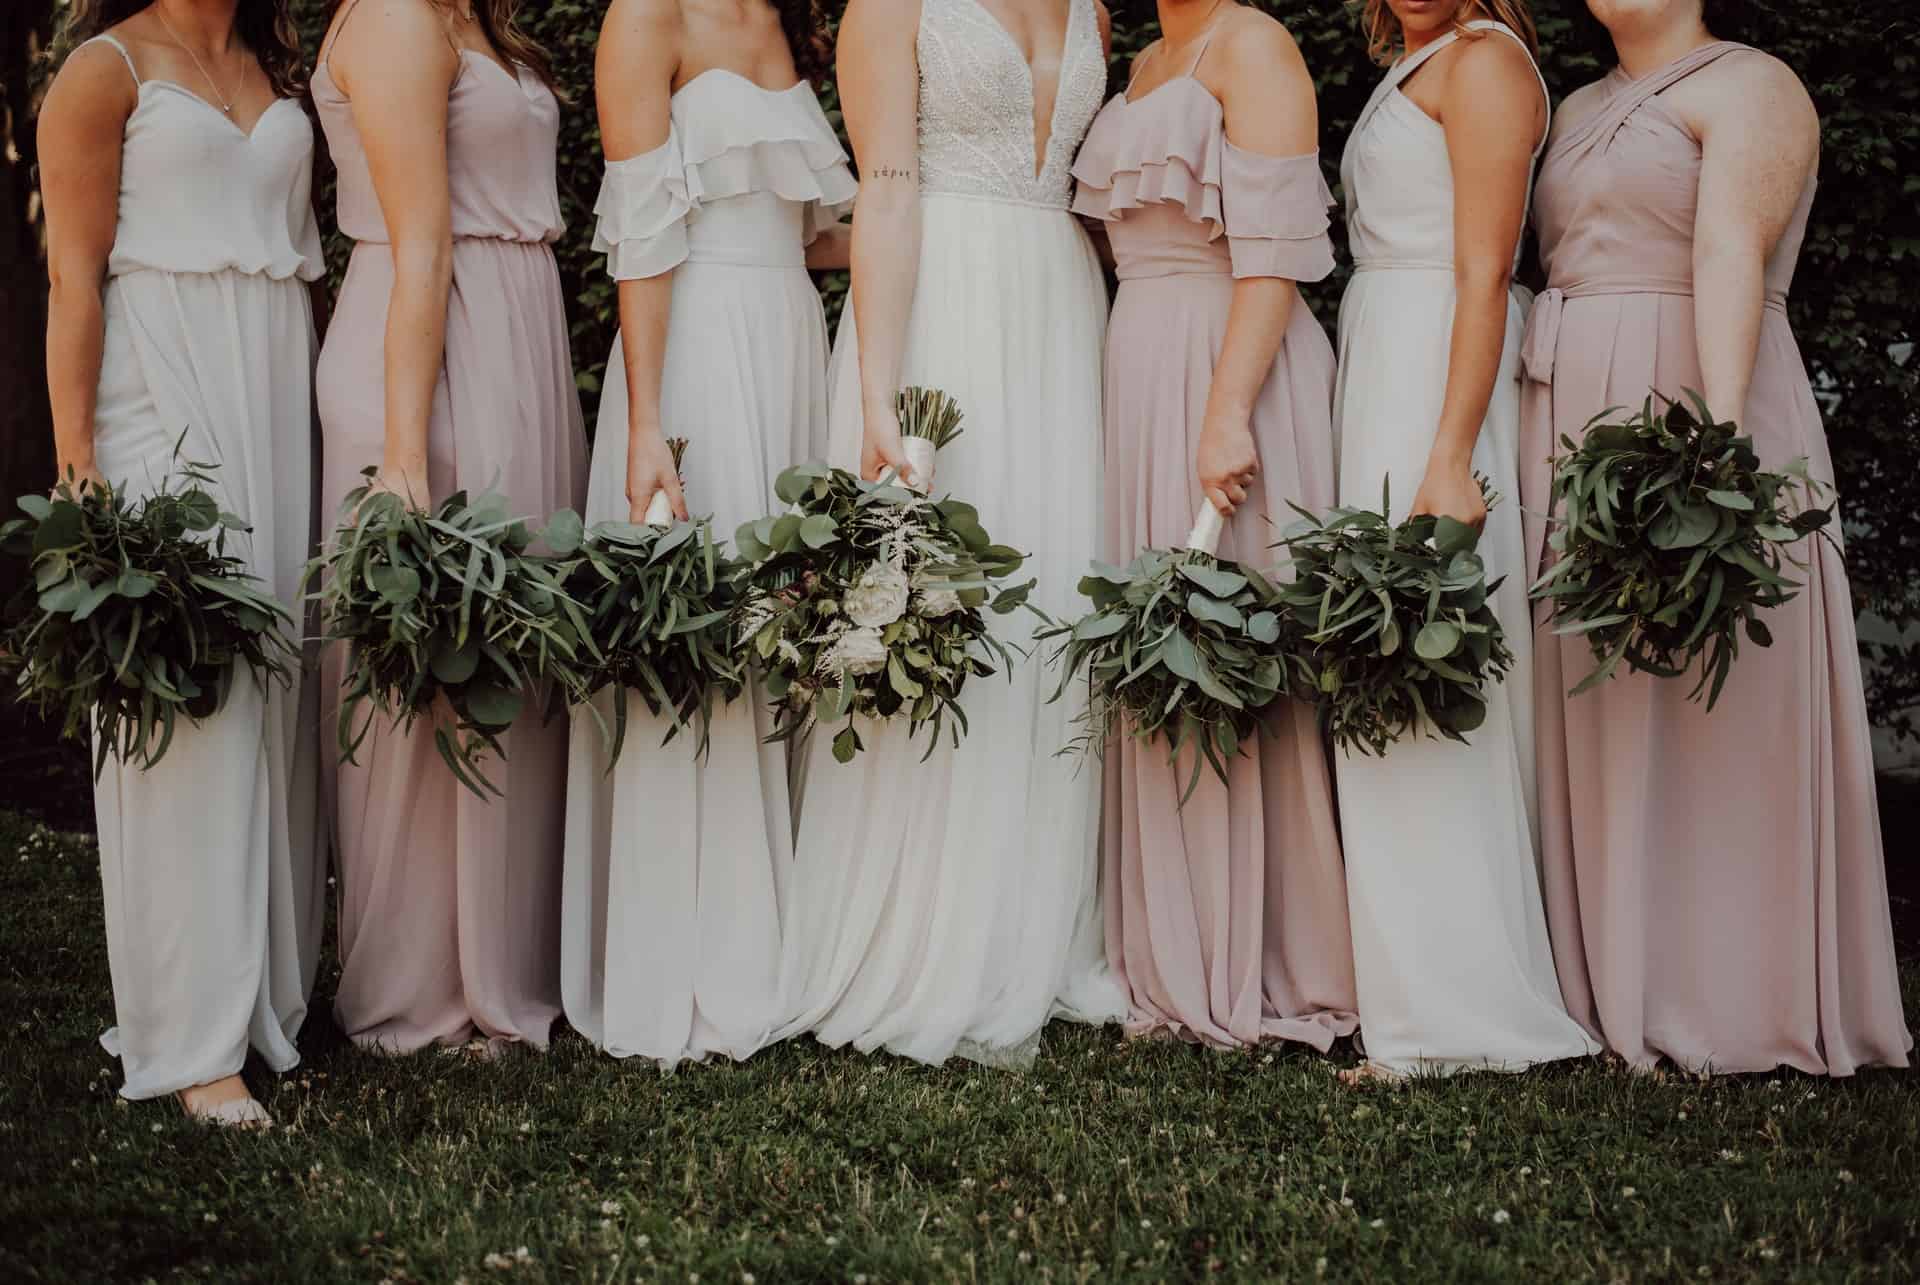 Have you been chosen as a bridesmaid? We have some advice for you